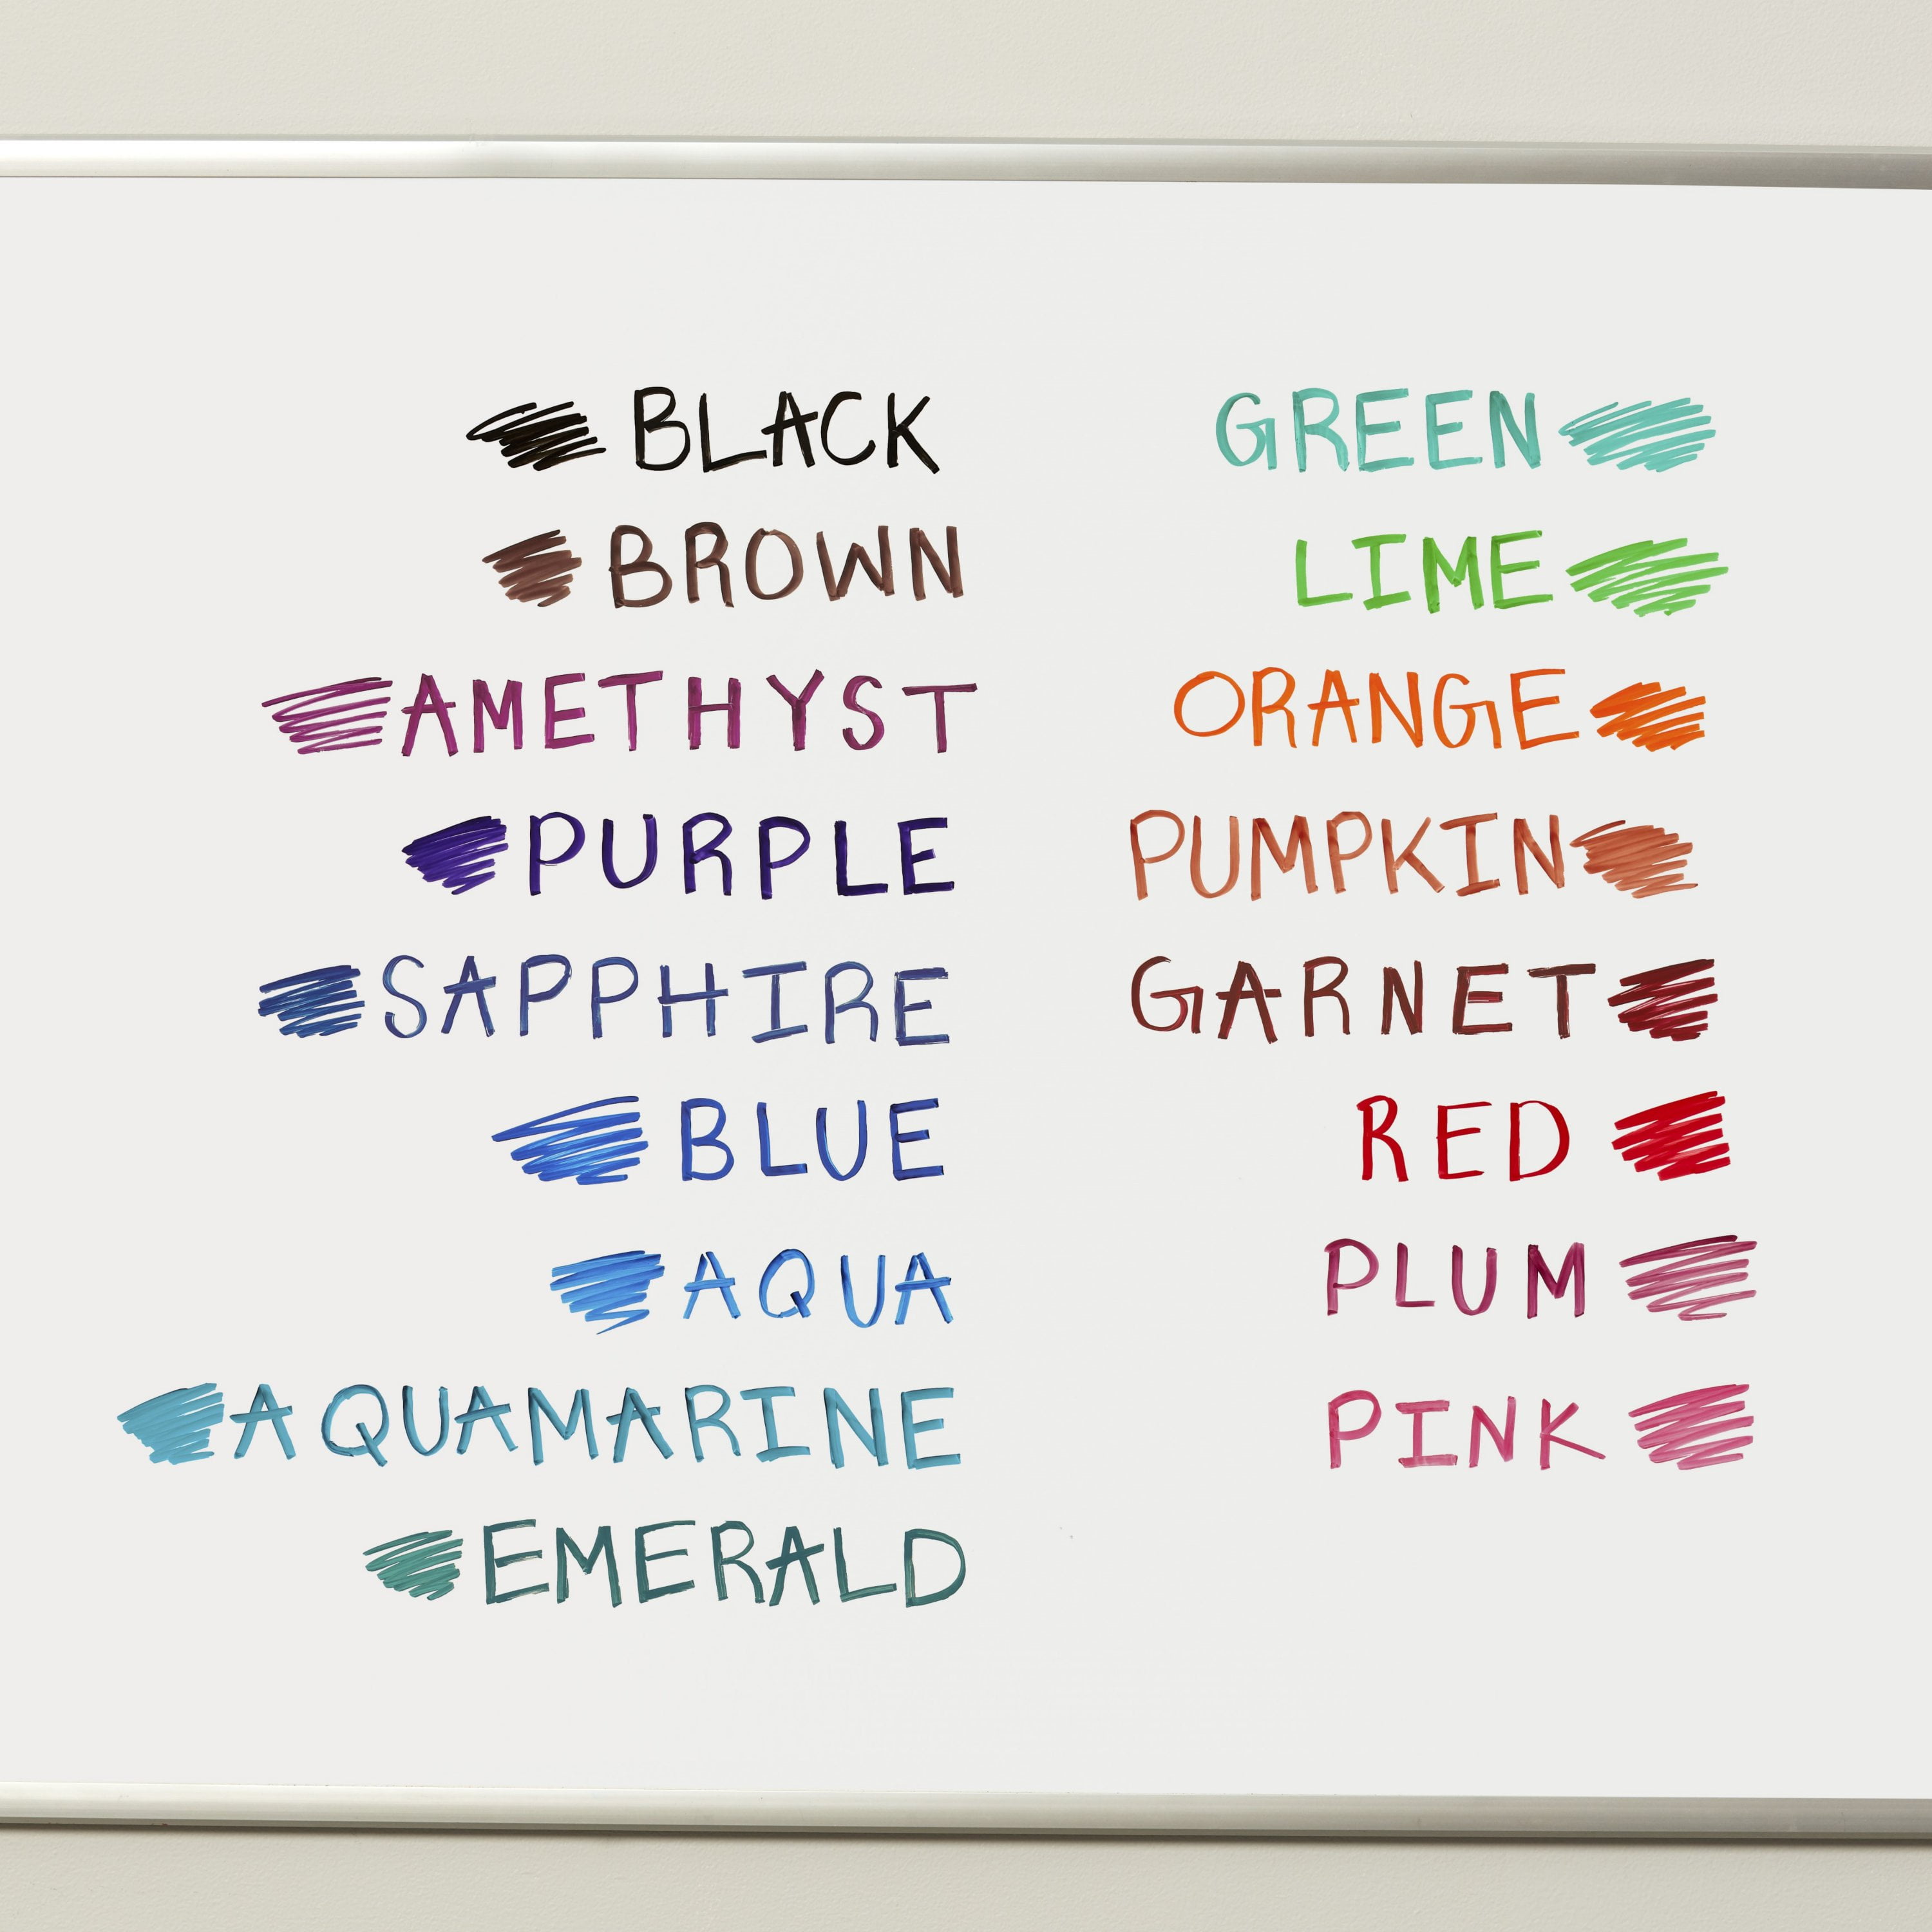 EXPO Low-Odor Dry-Erase Markers (Chisel Point, Asstd. Colors) - 16/Set  (81045)